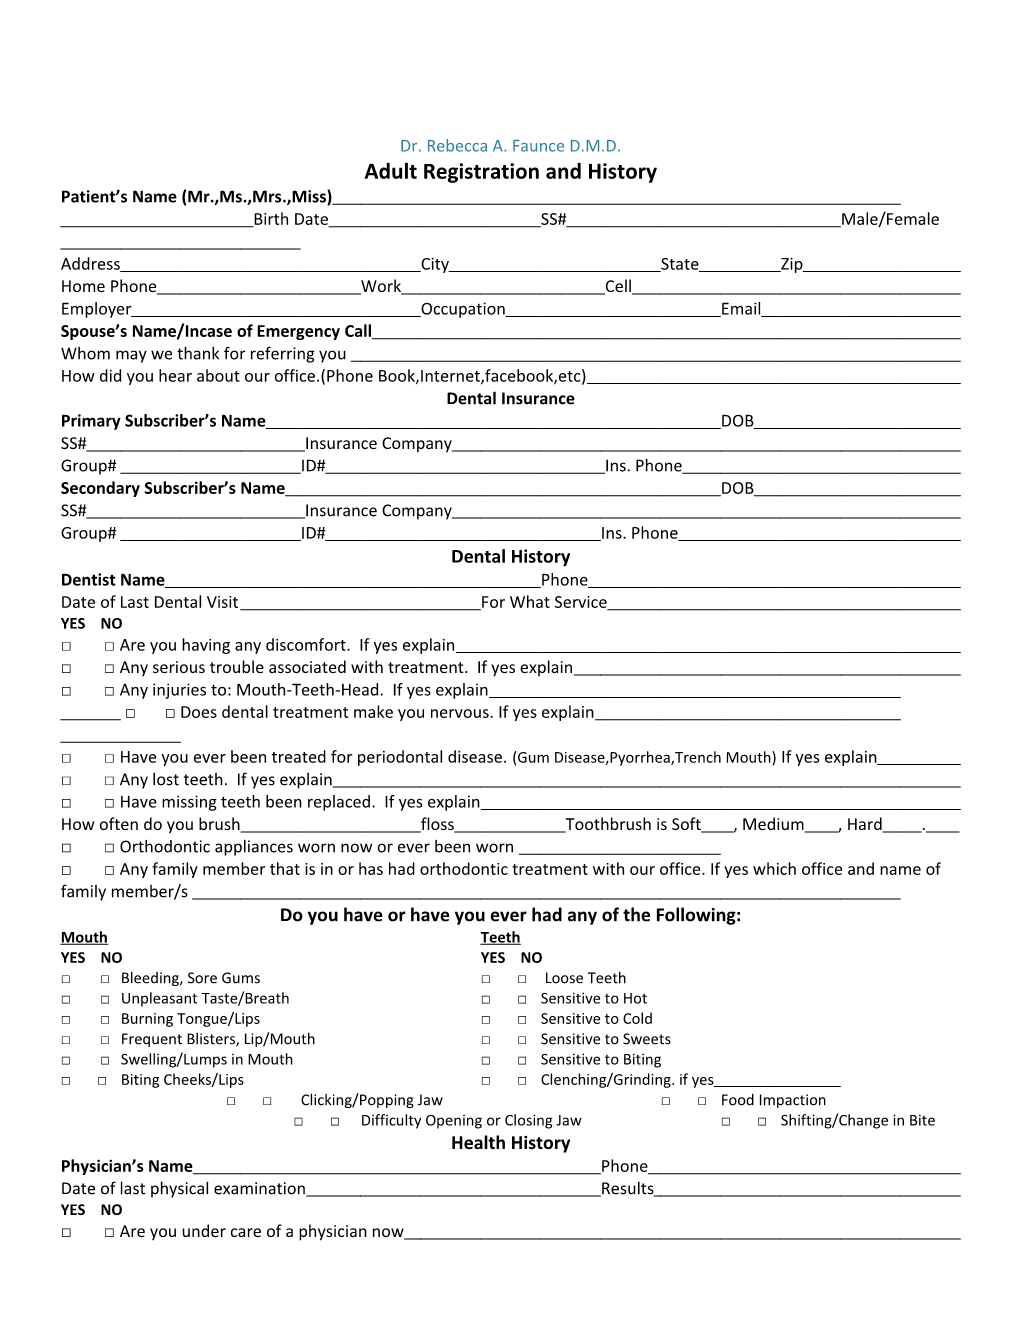 Adult Registration and History